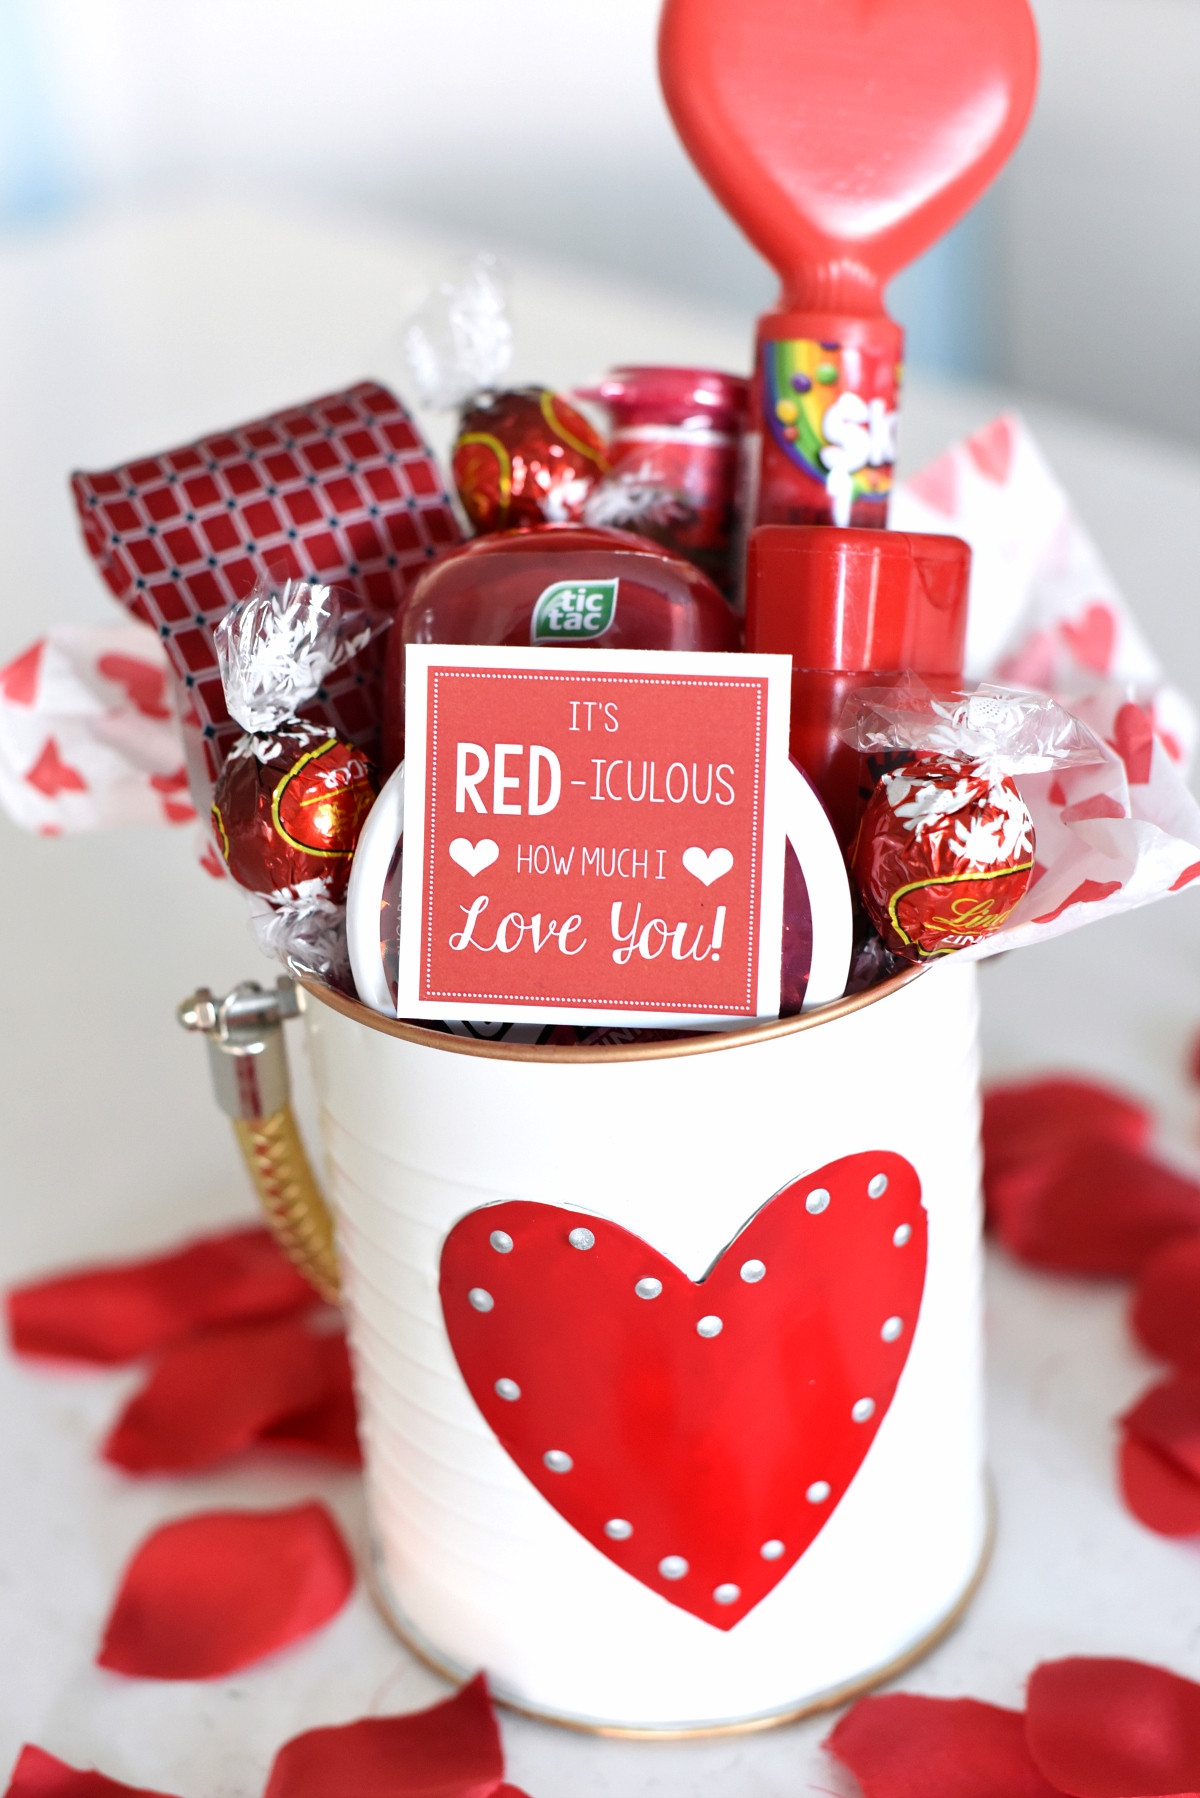 Valentines Gift Baskets Ideas
 Cute Valentine s Day Gift Idea RED iculous Basket